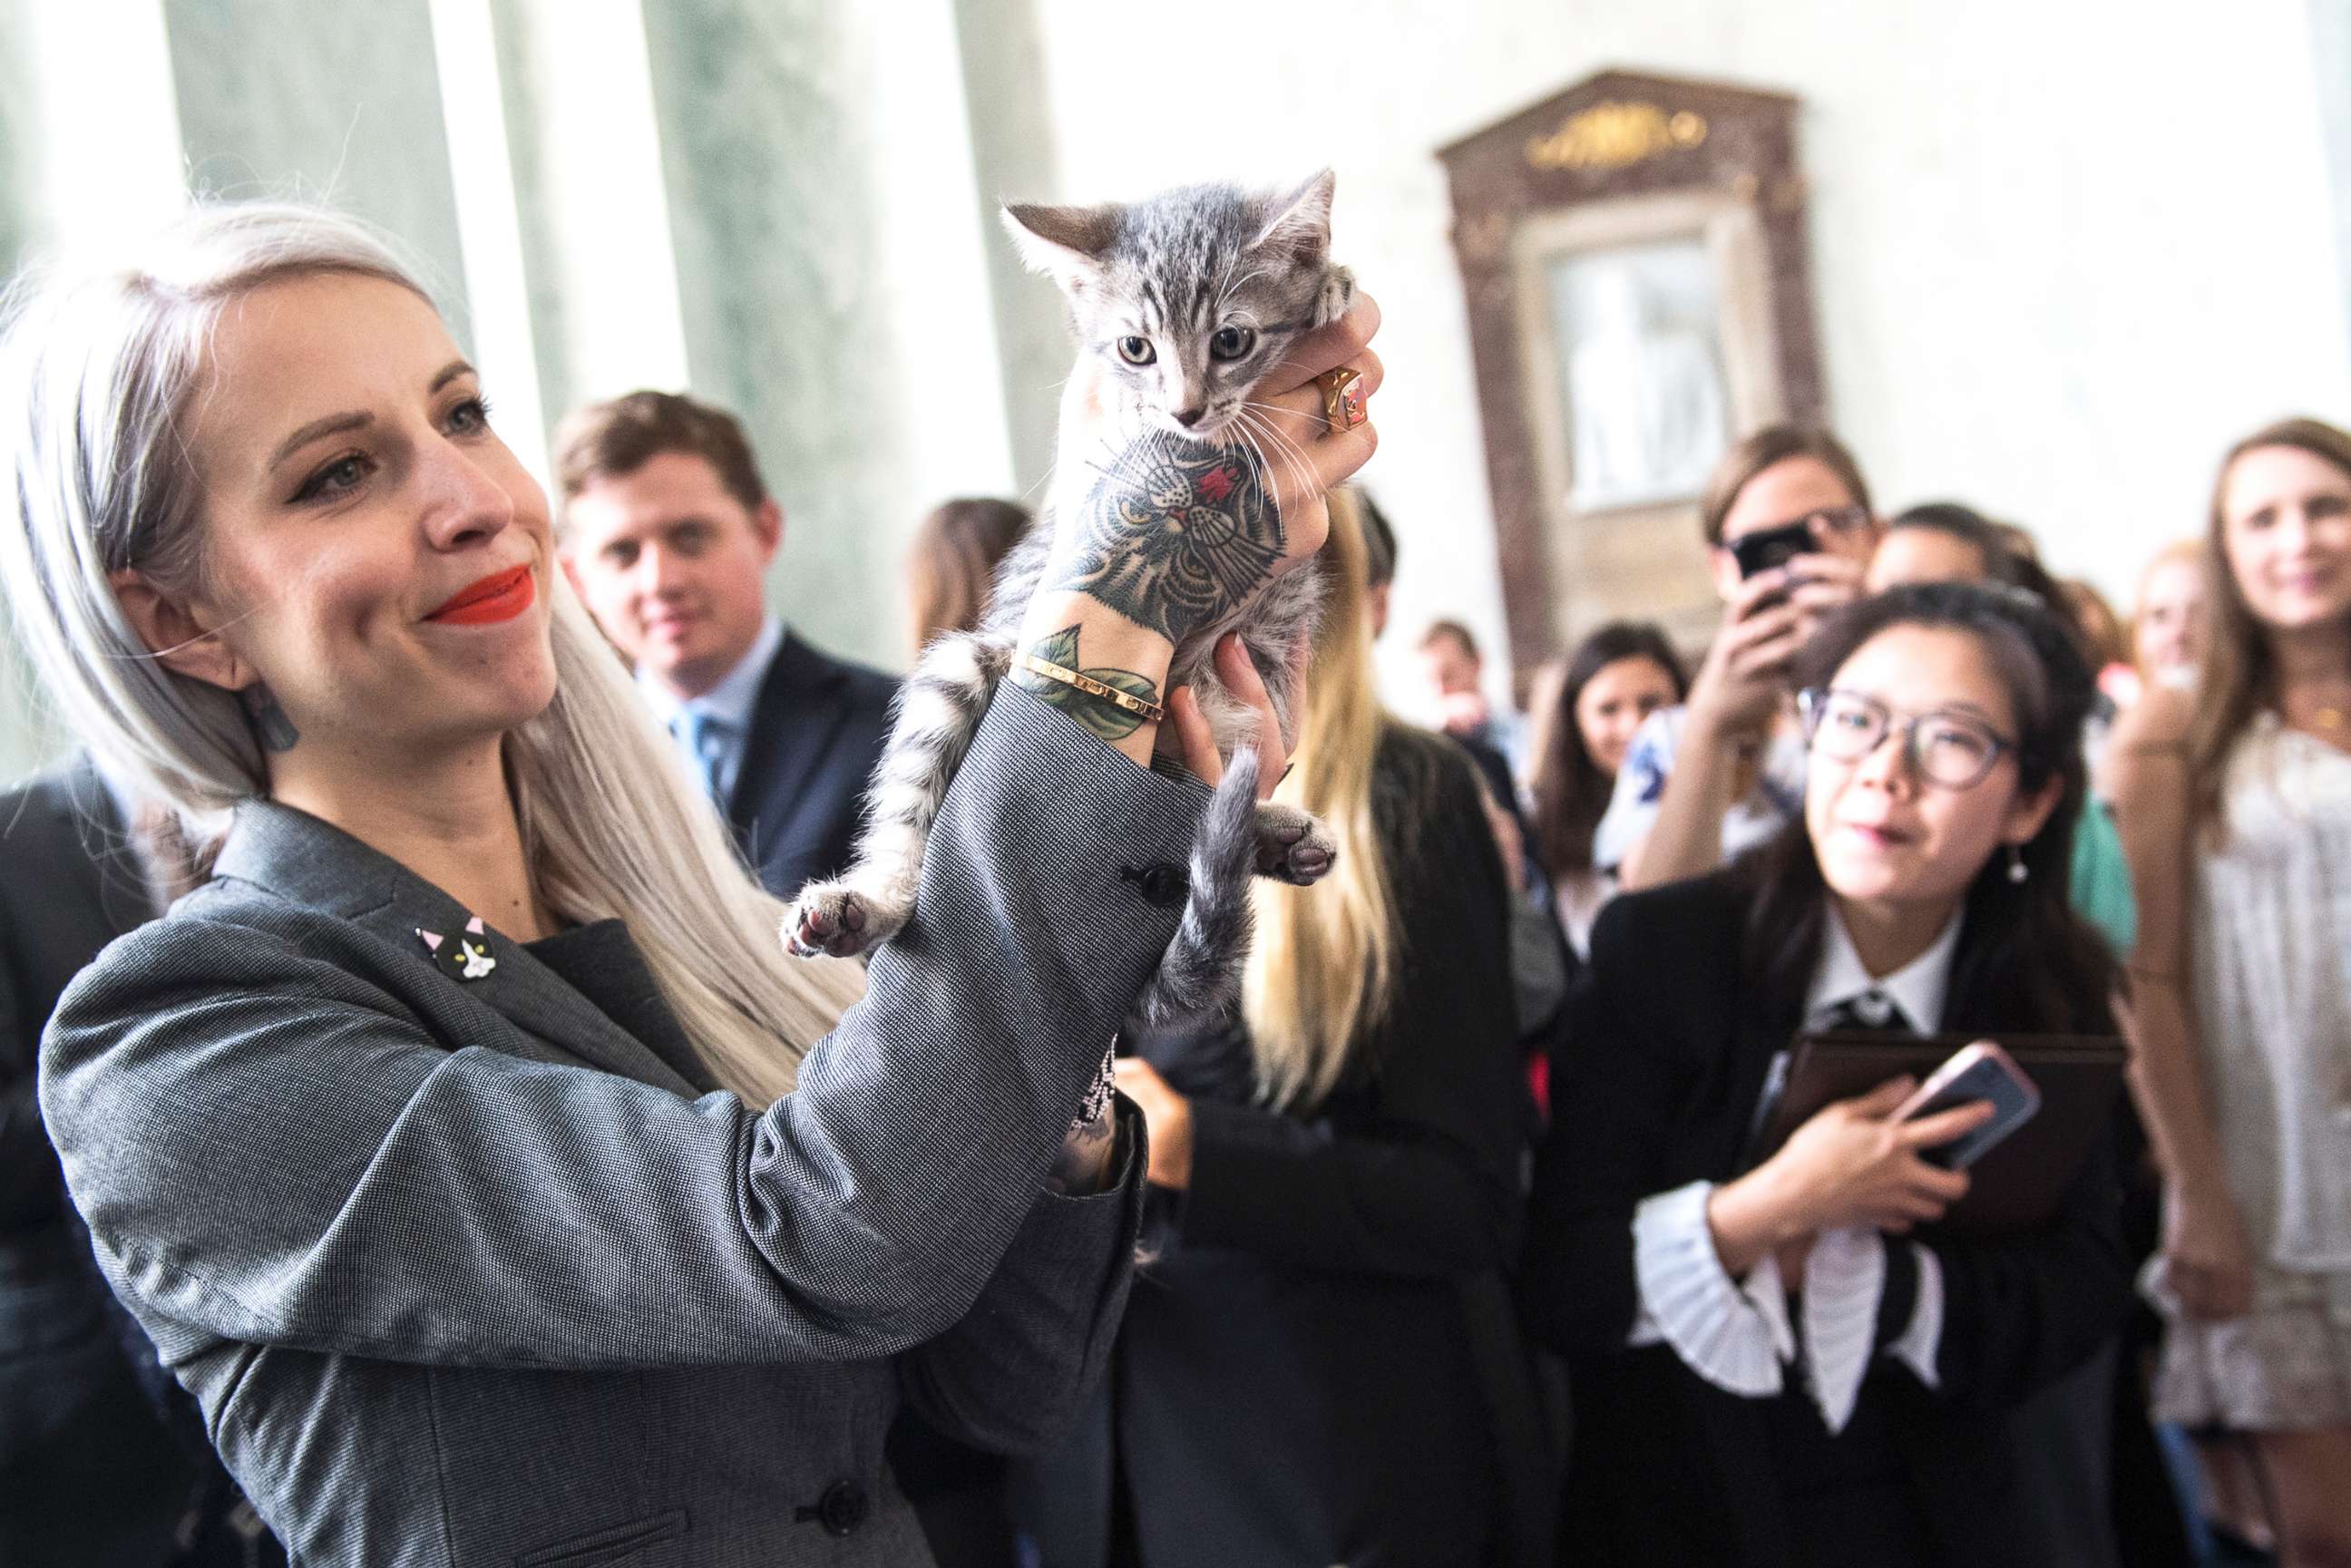 PHOTO: Hannah Shaw, an animal advocate known as "Kitten Lady," attends an event on bipartisan legislation introduced by Reps. Jimmy Panetta and Mike Bishop to end the Department of Agriculture's scientific testing on kittens on June 7, 2018.